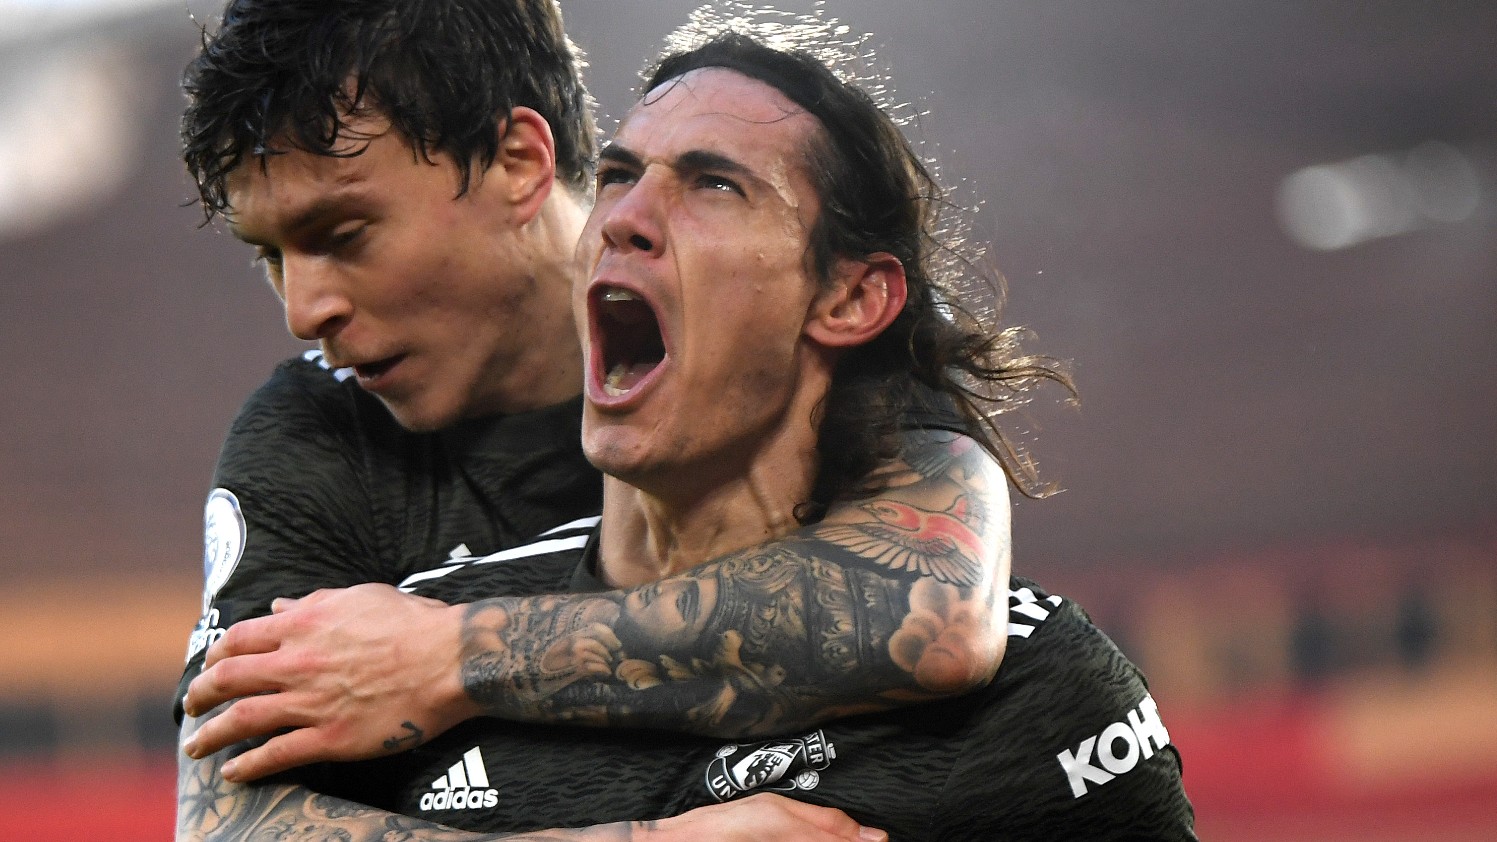 Cavani explains how he became a 400-goal striker that stands to benefit Man Utd